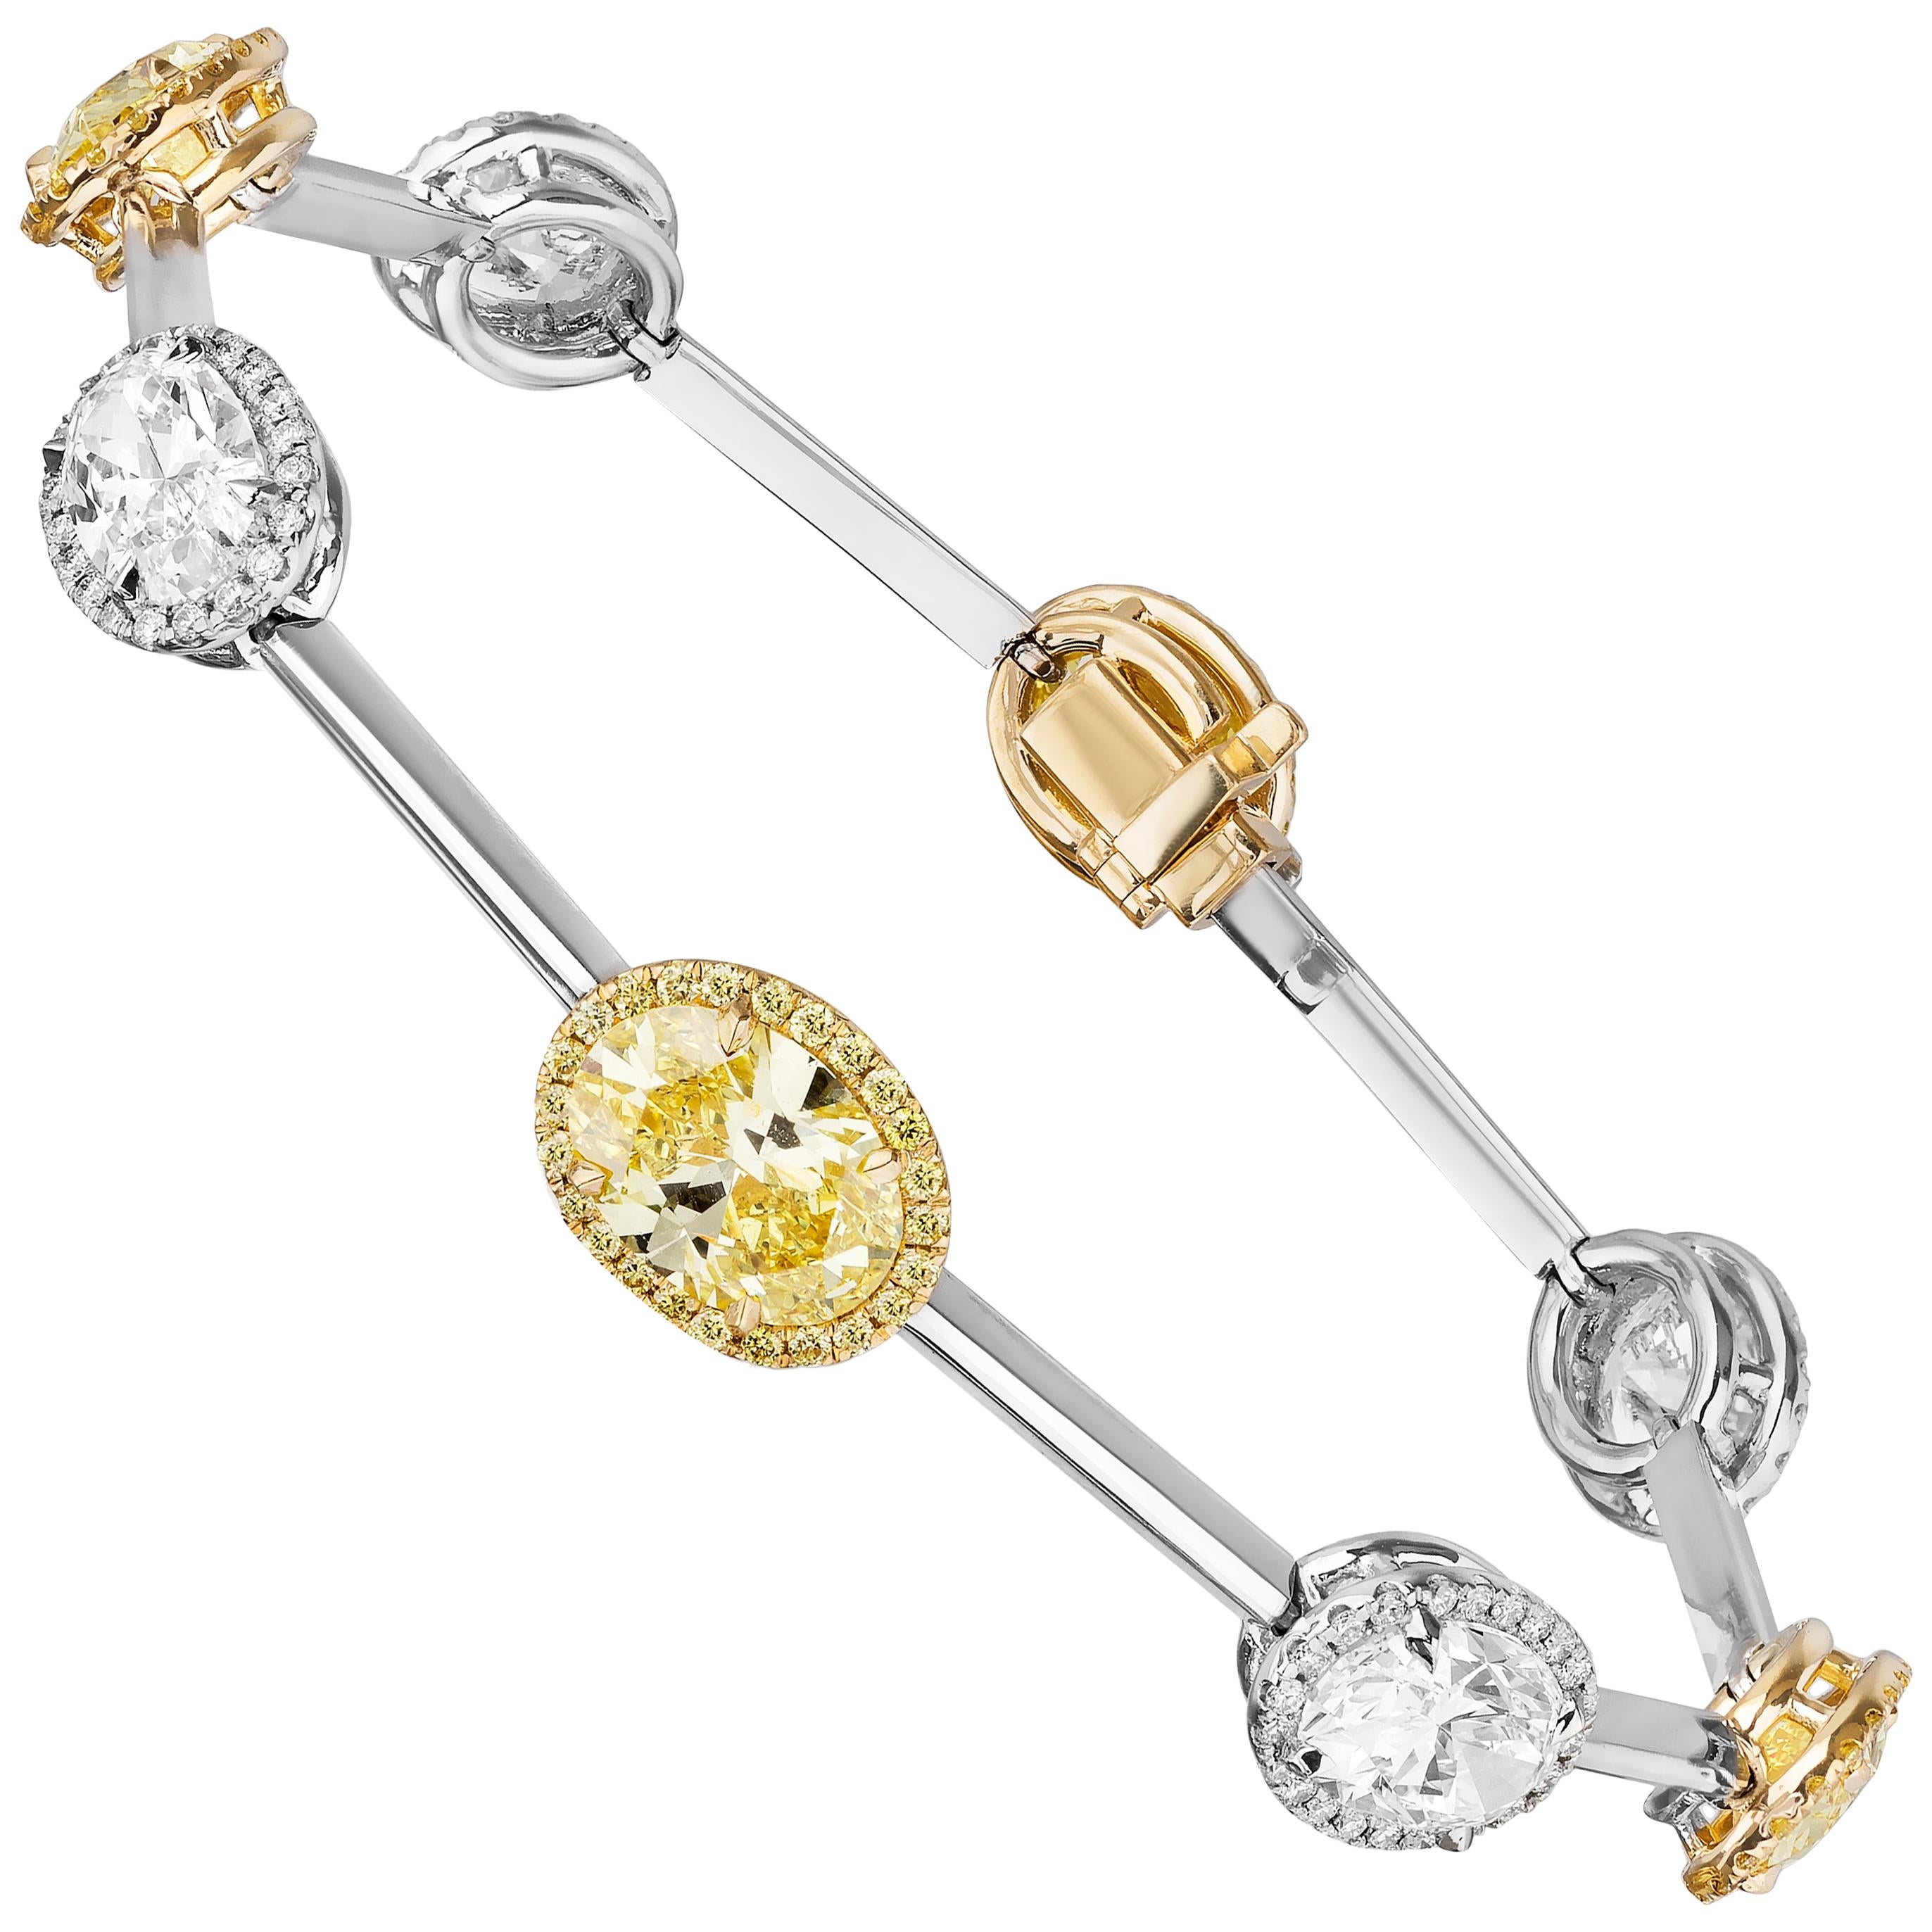 GIA Certified 7.61 Carat Fancy Yellow and White Oval Diamond Bracelet For Sale